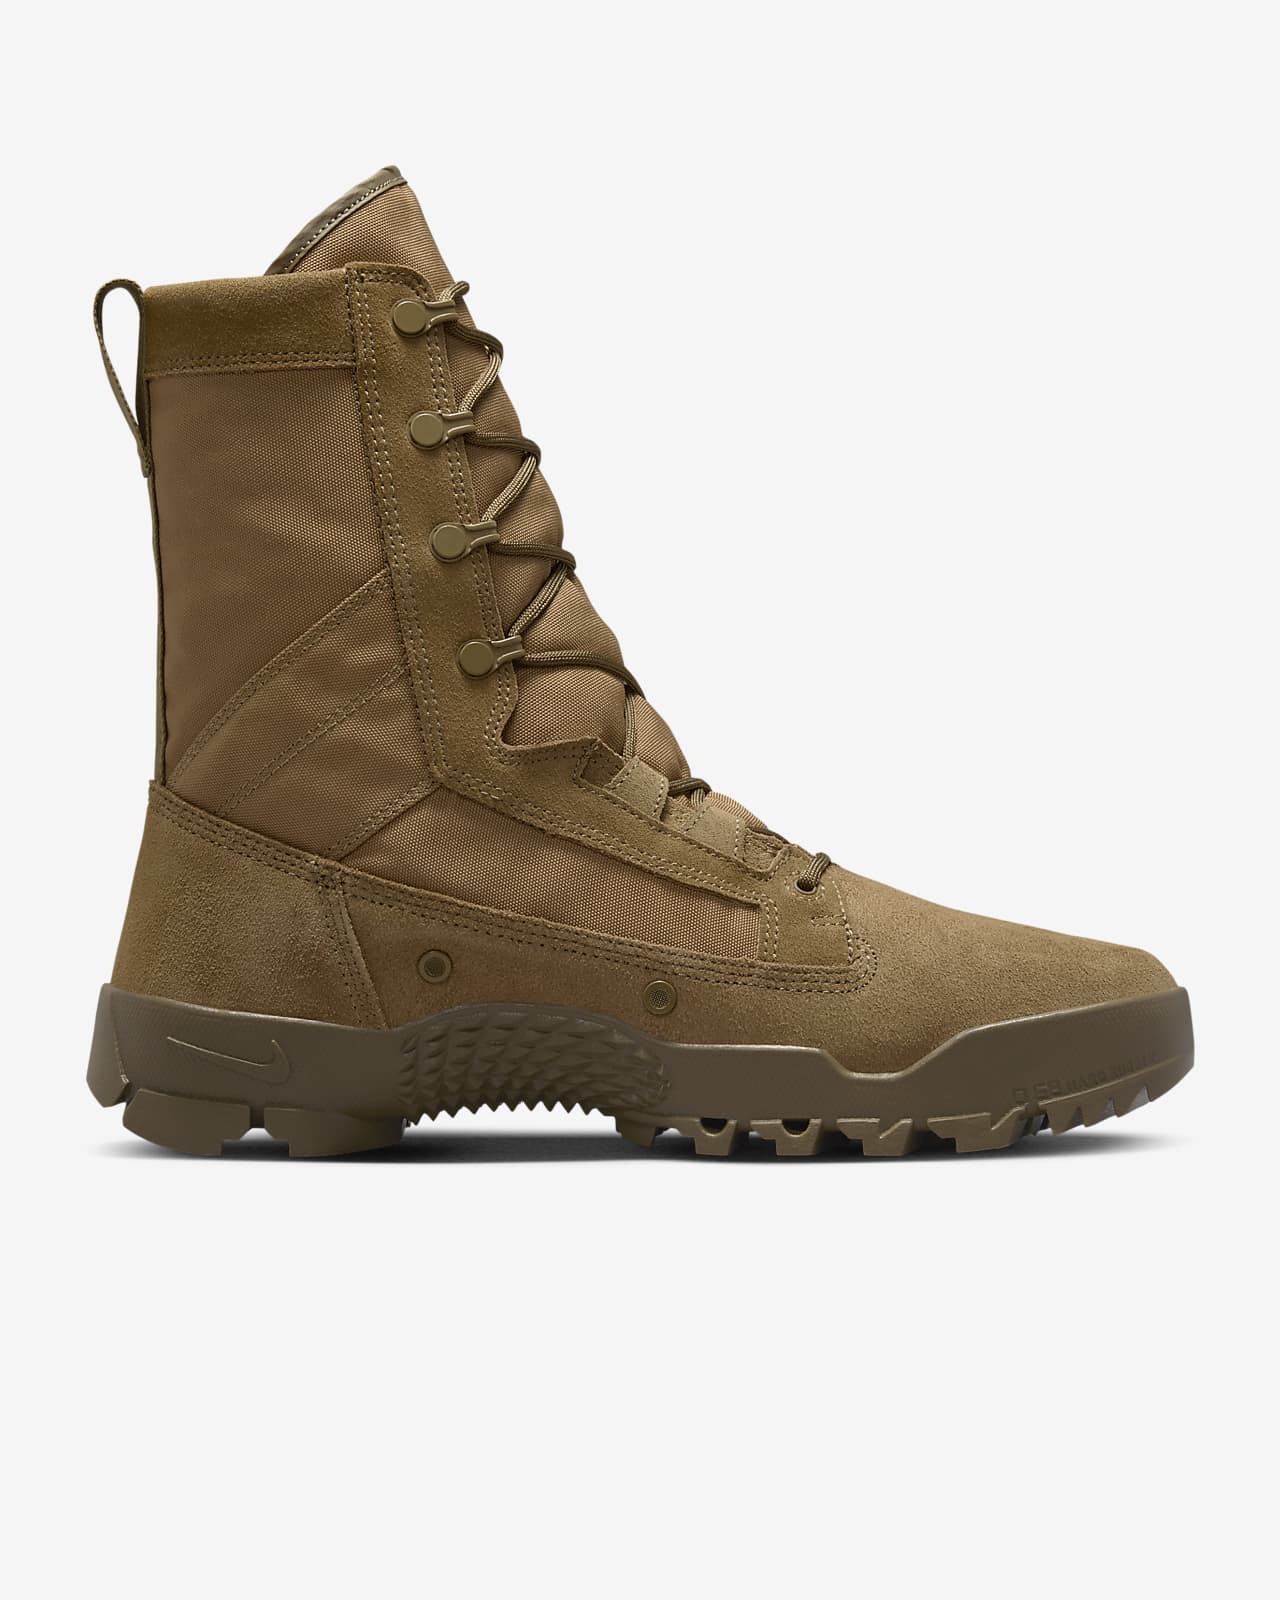 Northeast Messed up Glue nike tactical boots with zipper Tanzania ...